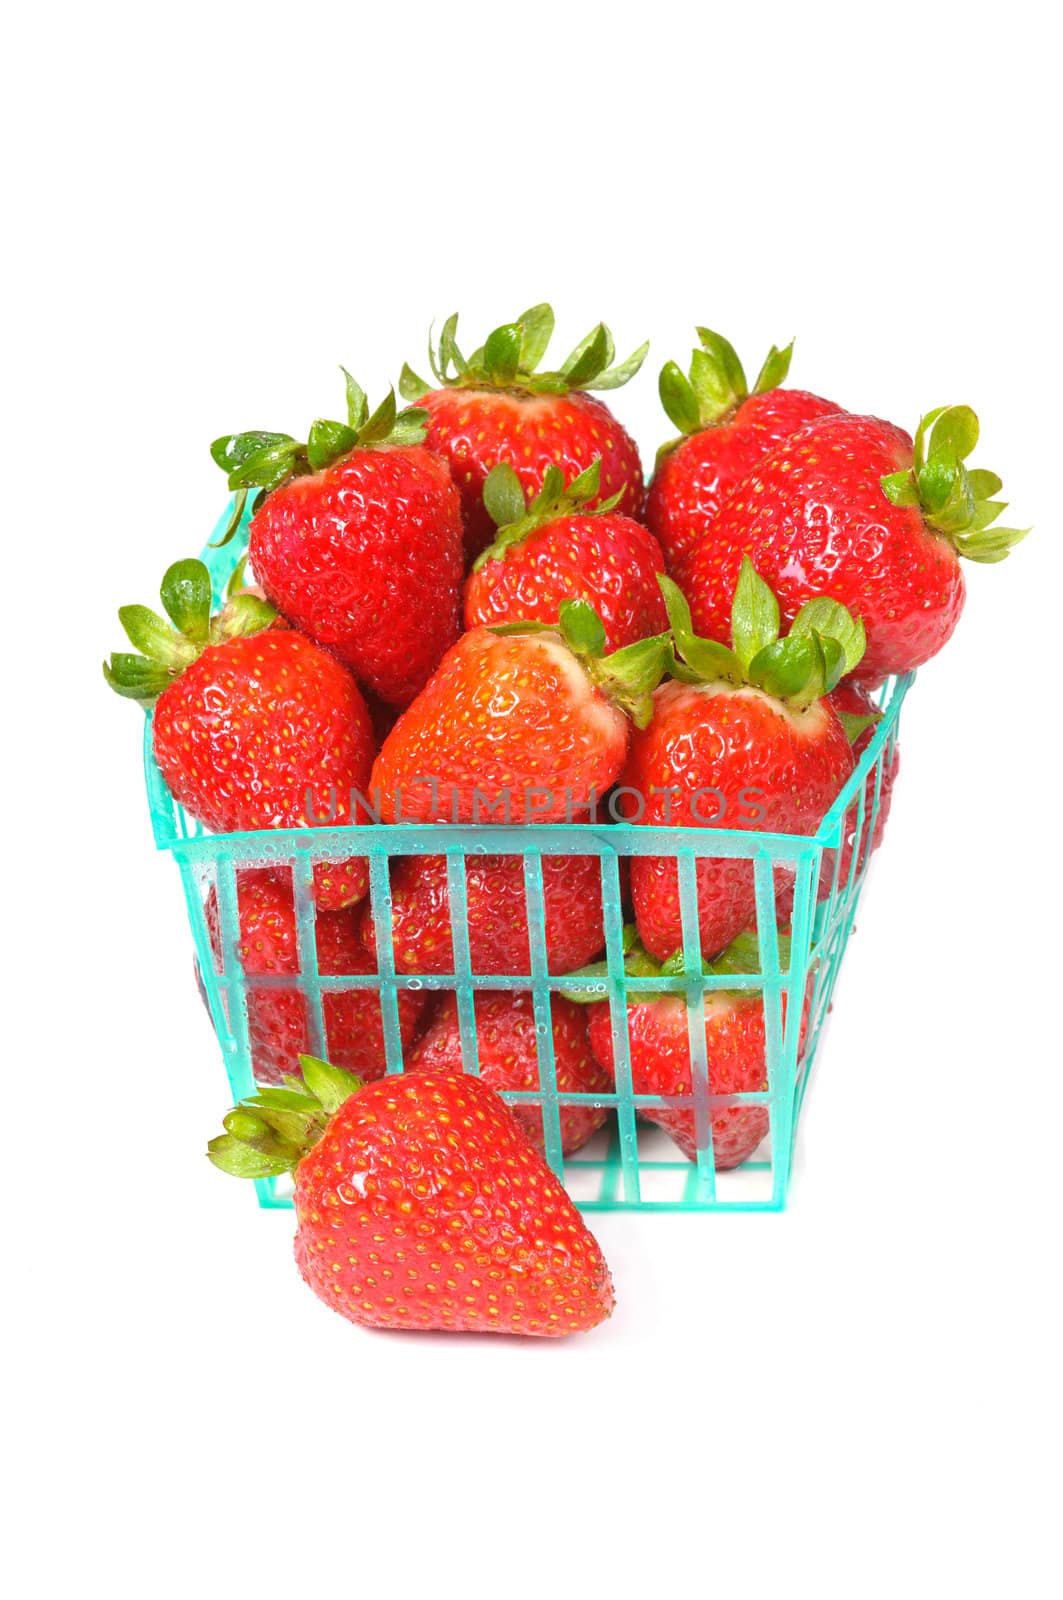 Punnet or basket of fresh strawberries on a white background